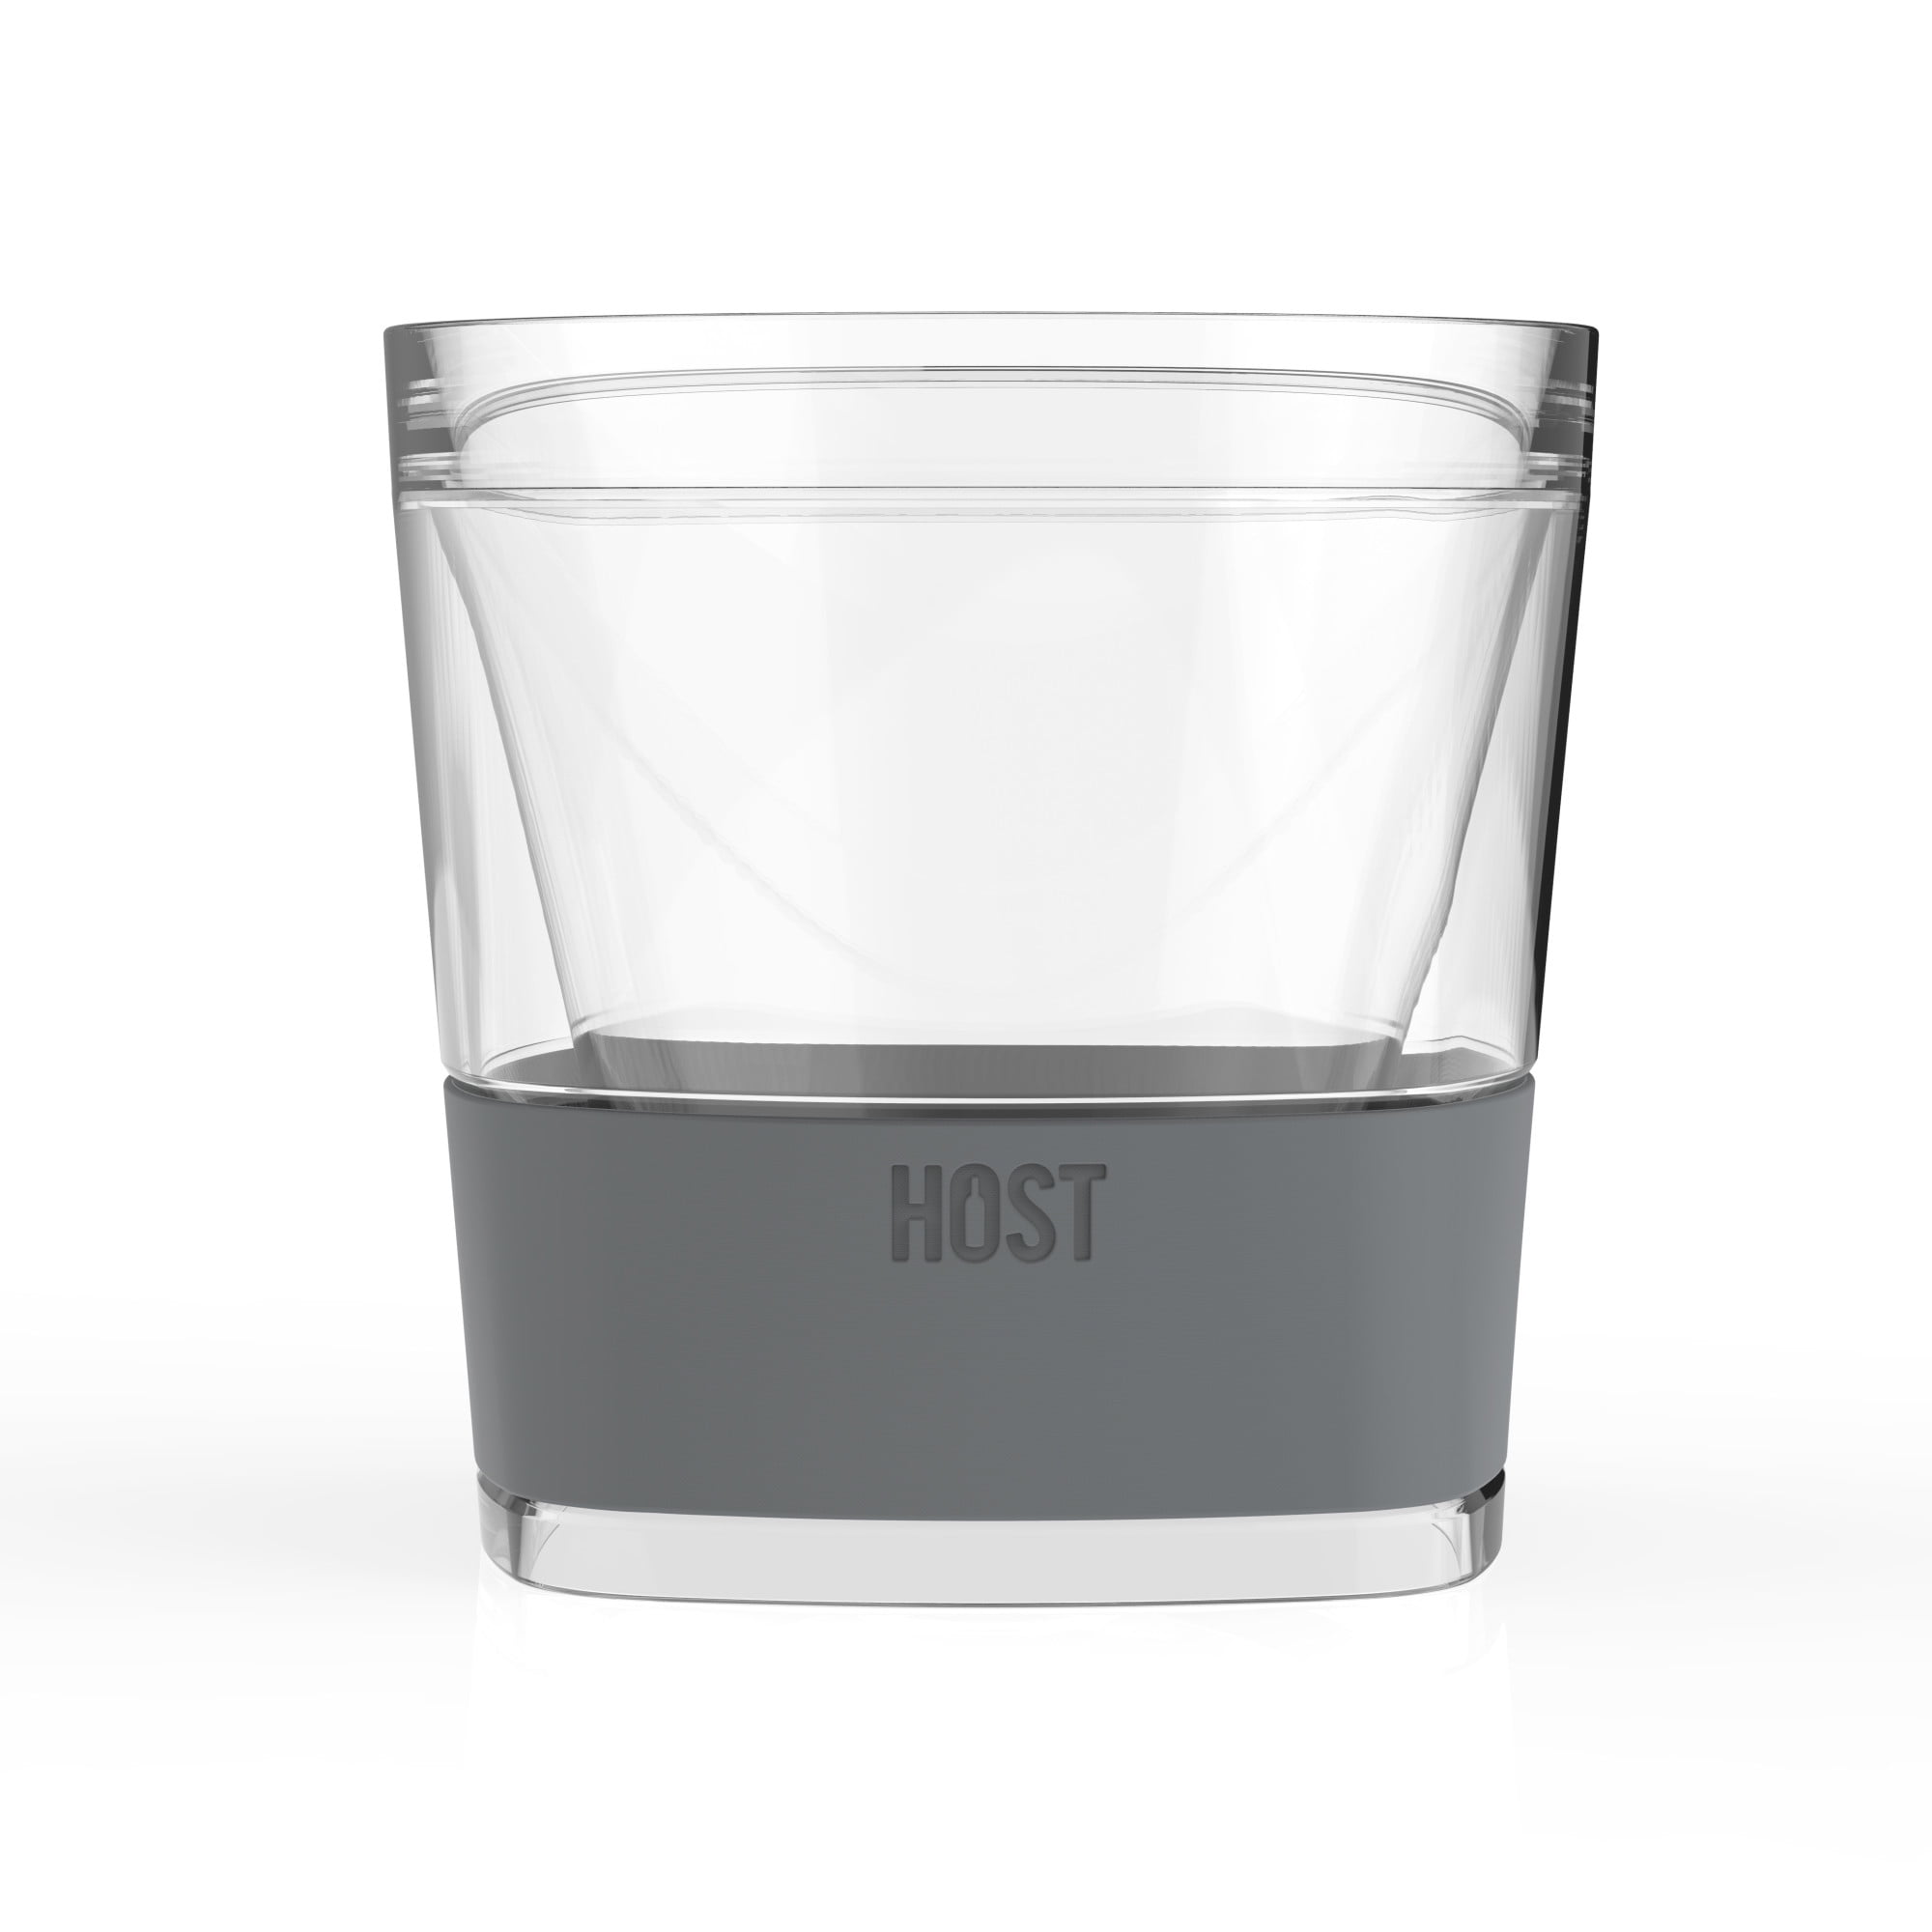 Freeze Cooling Cups, Whiskey Glasses for Whiskey, Bourbon, Scotch, Plastic  Double Wall insulated Tum…See more Freeze Cooling Cups, Whiskey Glasses for